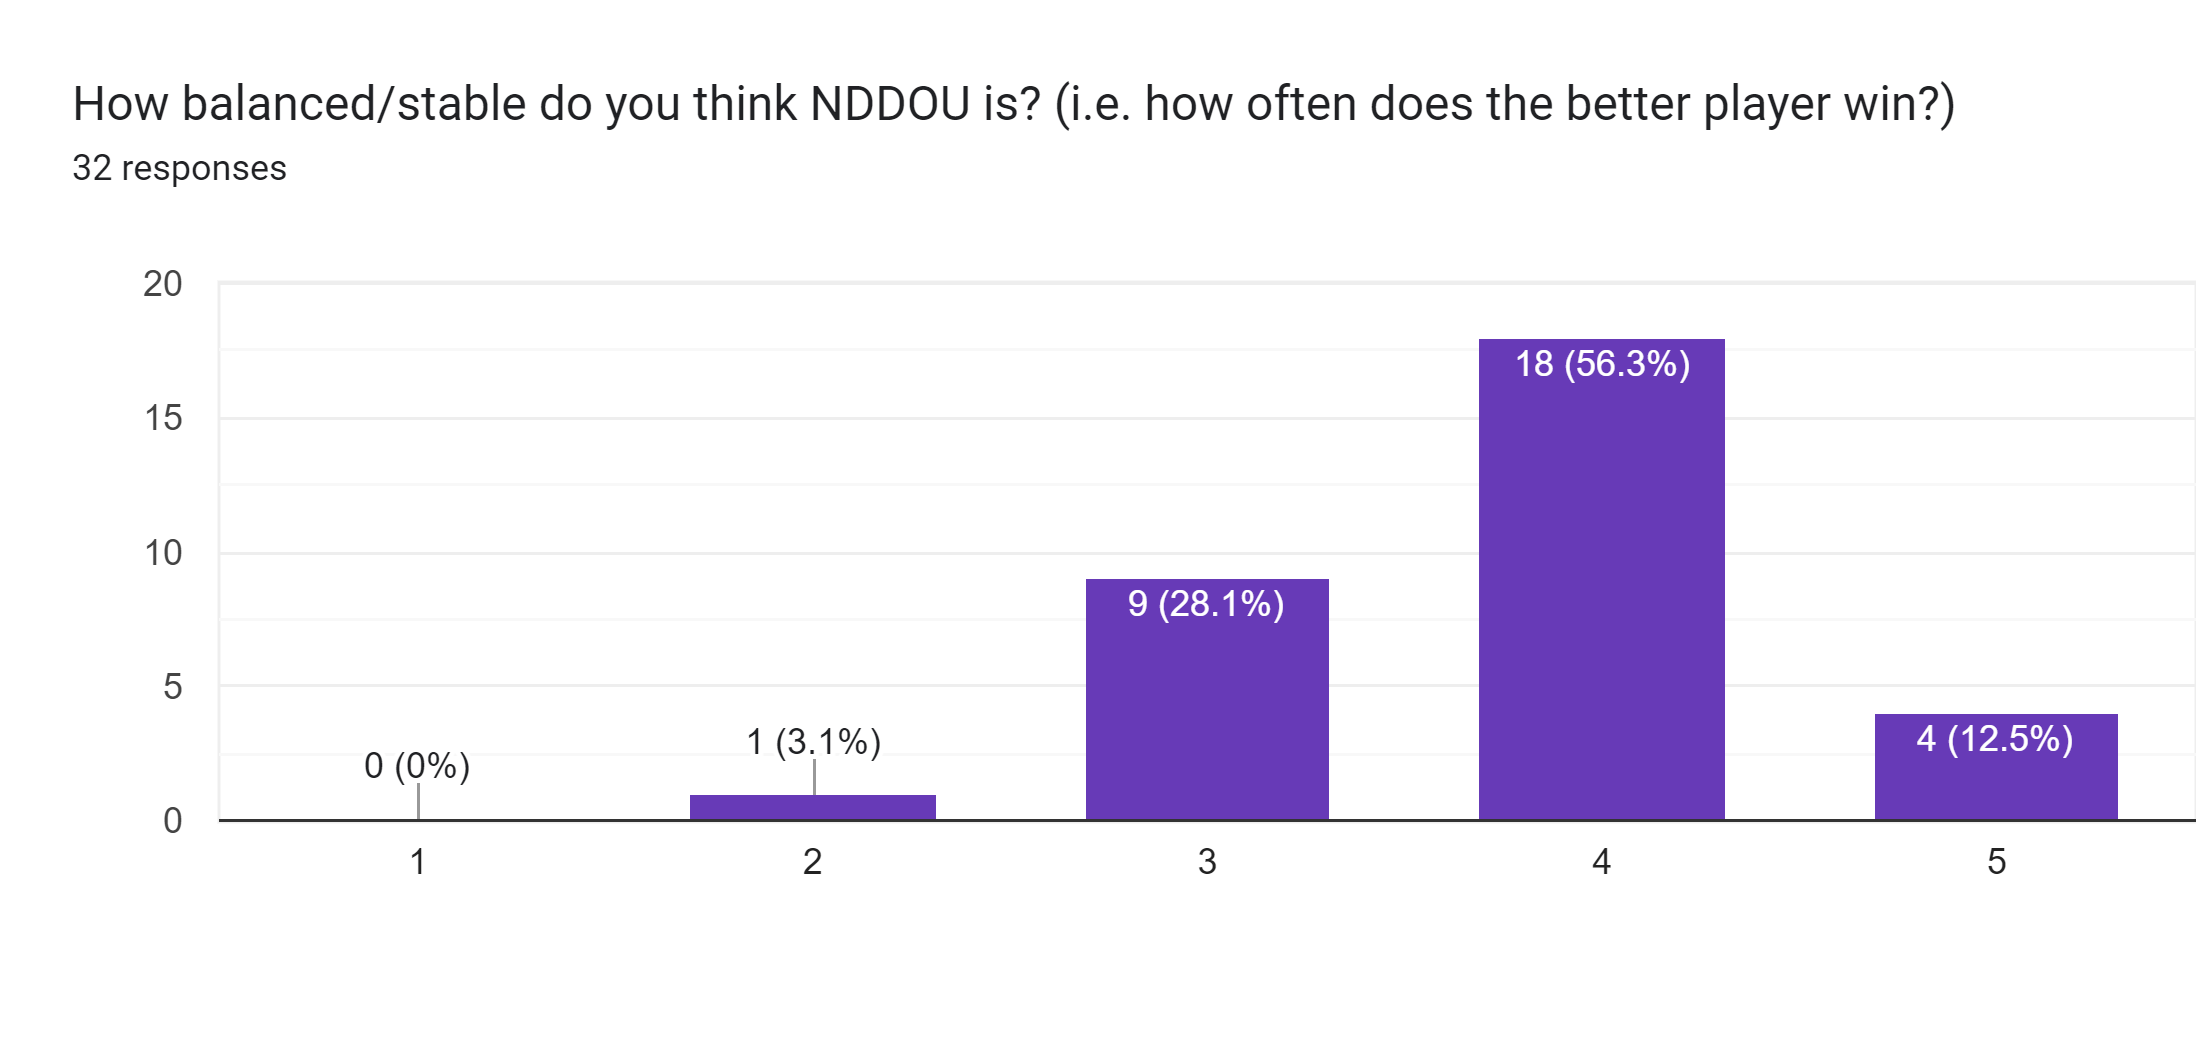 Forms response chart. Question title: How balanced/stable do you think NDDOU is? (i.e. how often does the better player win?). Number of responses: 32 responses.